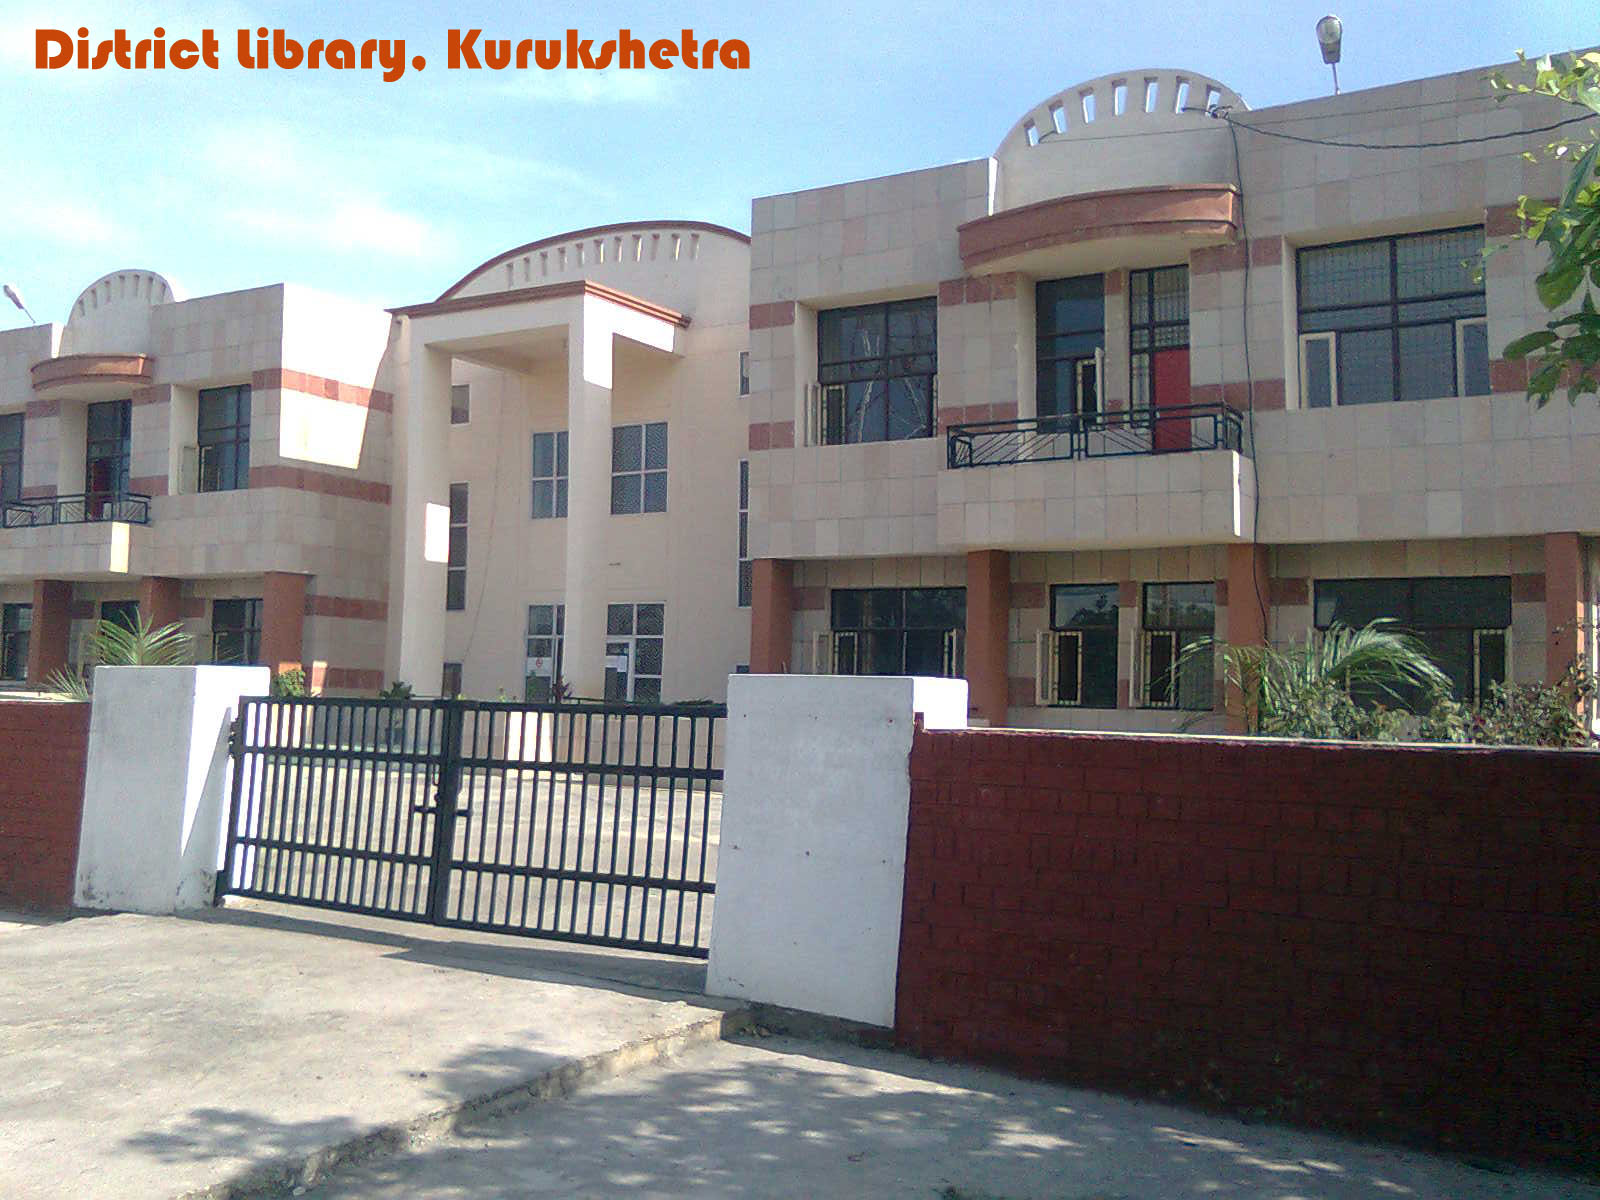 State Central Library, Ambala Cantt.